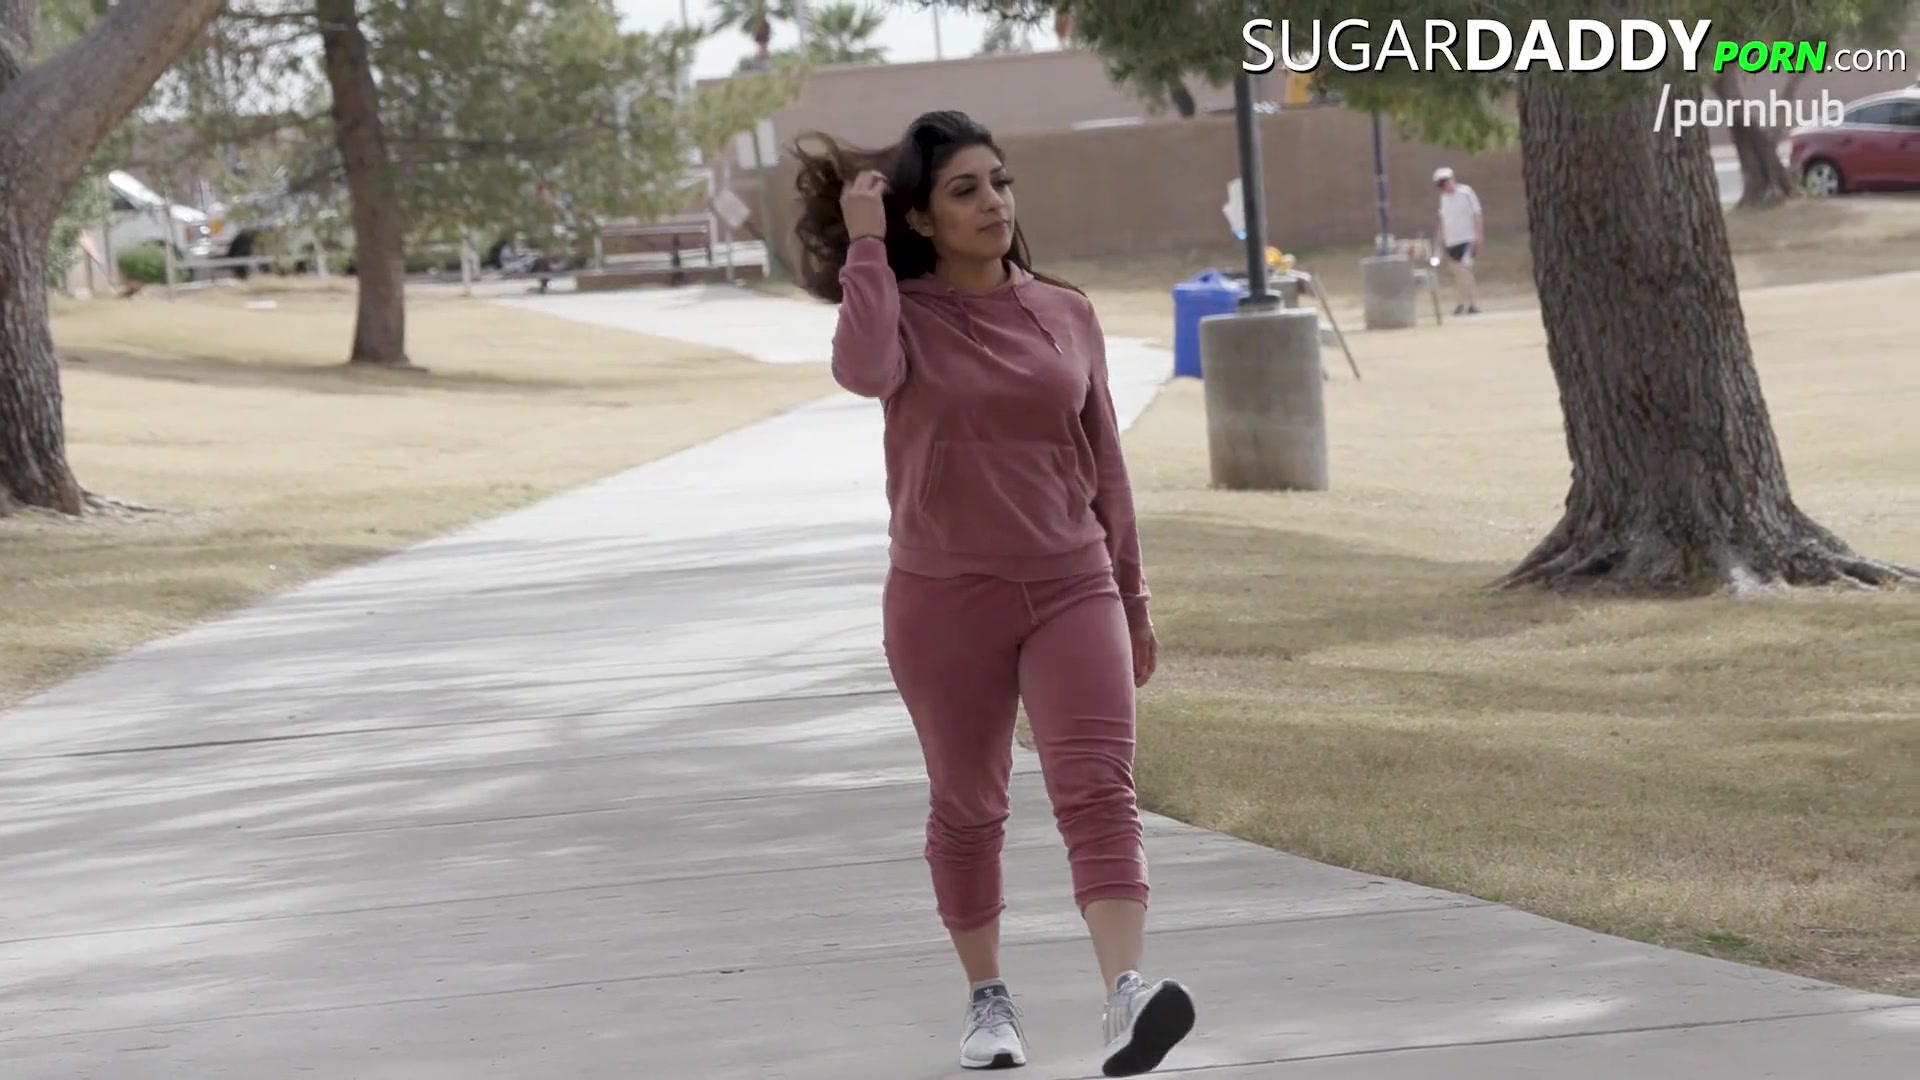 Thick Ass Latina Does Workout In Park To Get New Sugar Daddy ...